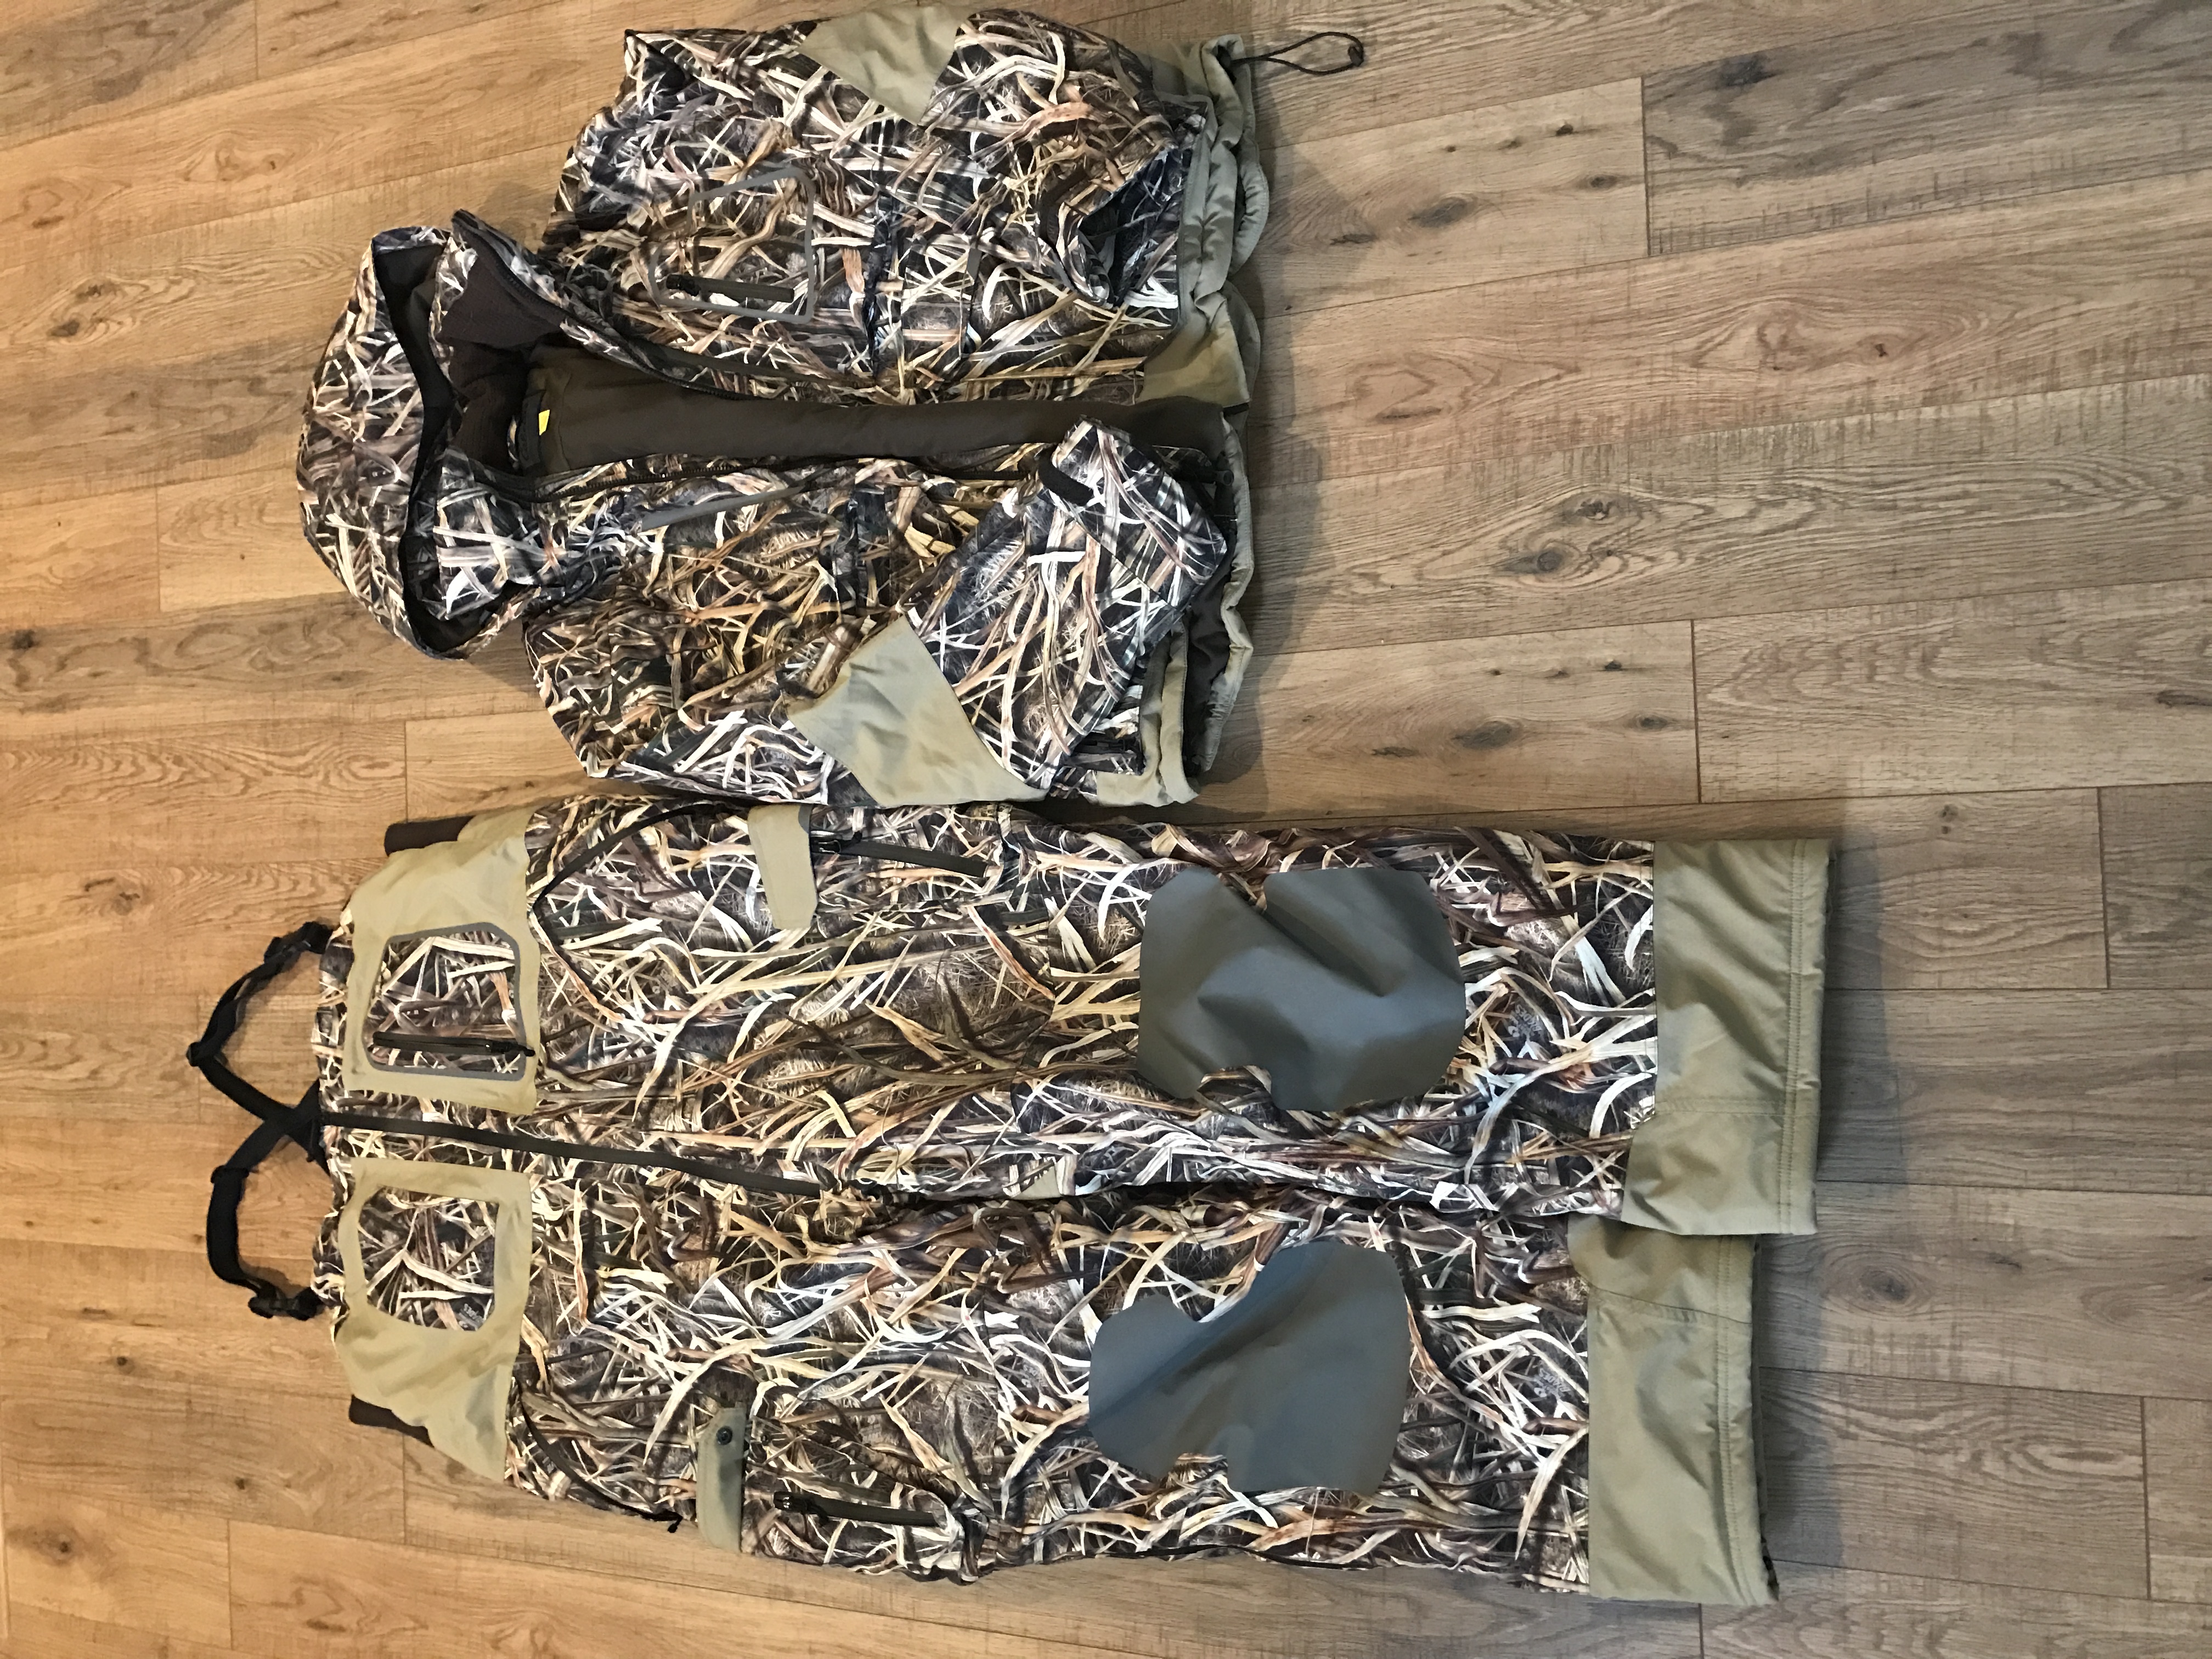 Cabelas Northern Flight Coat and Bibs - Classified Ads - Classified Ads ...